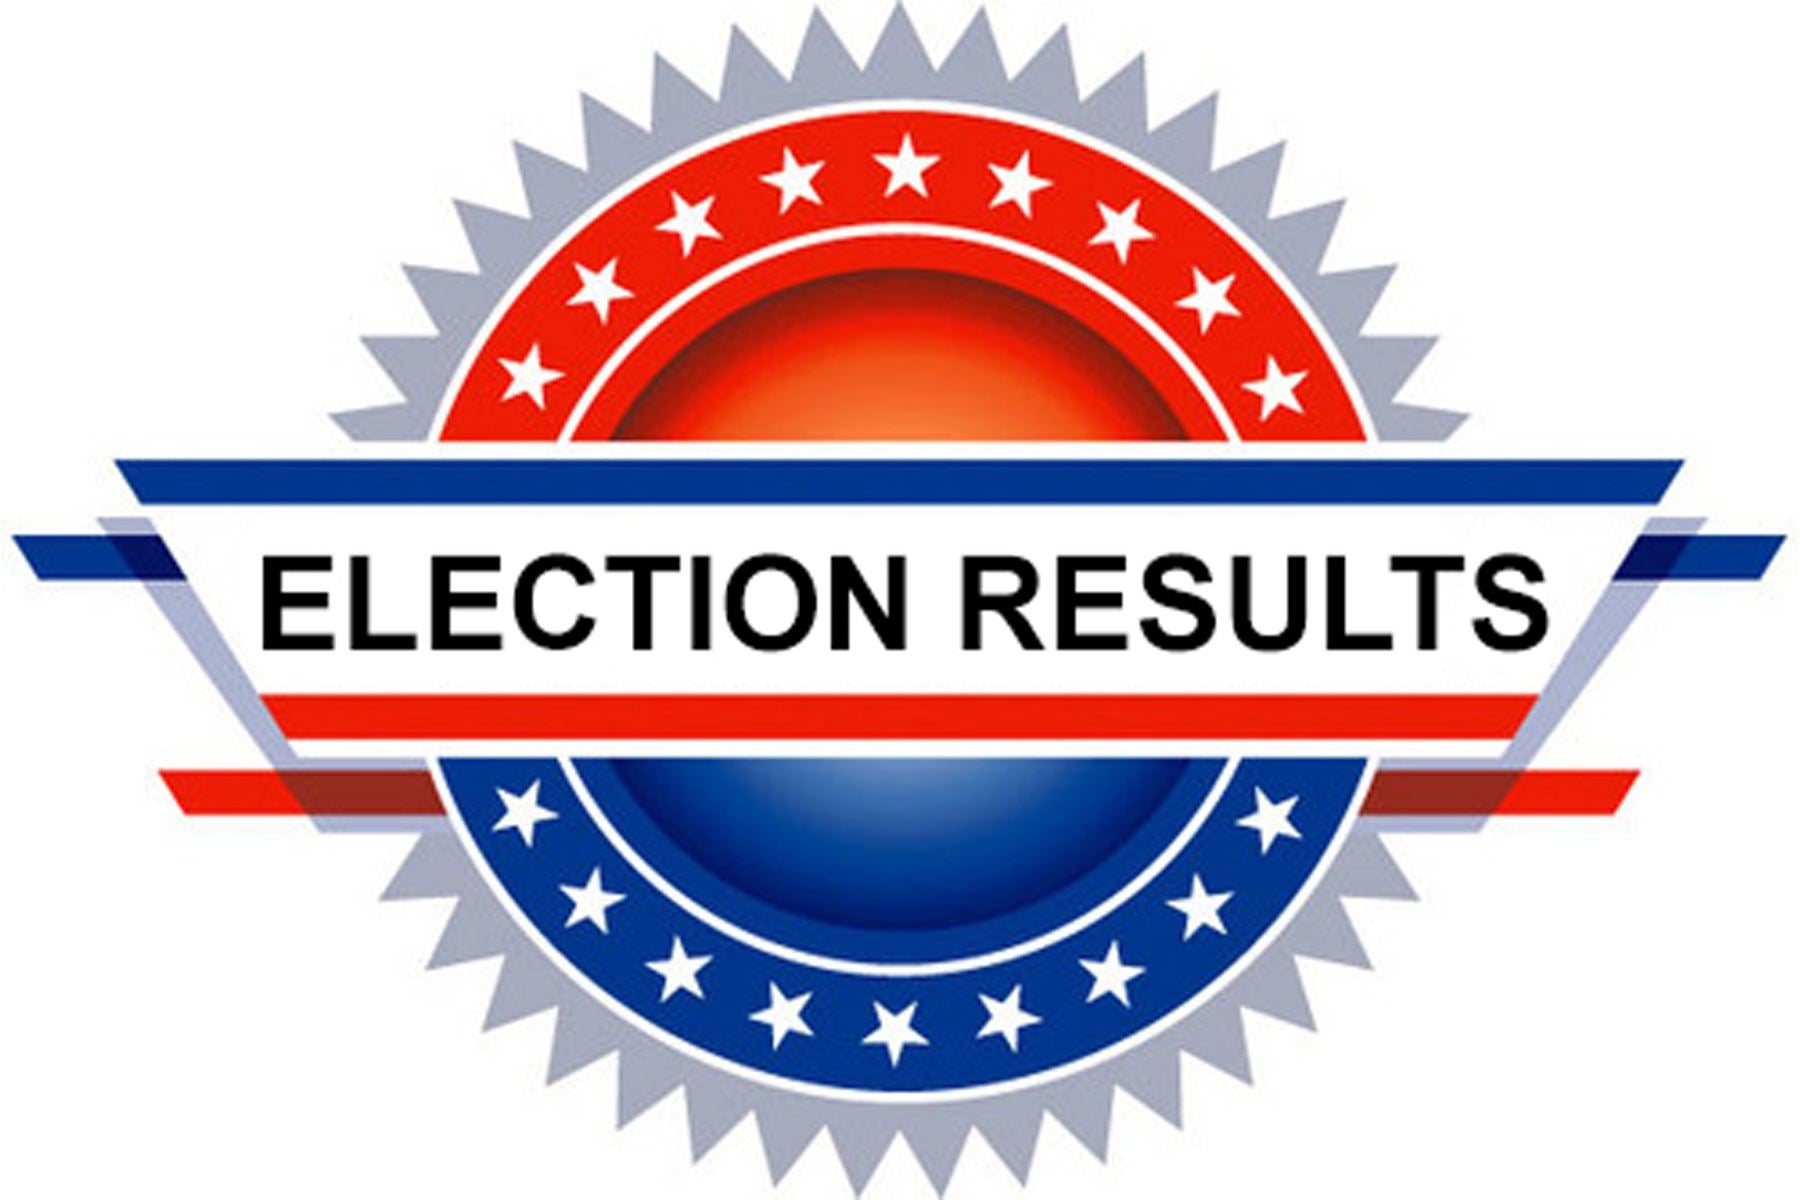 Election Results banner